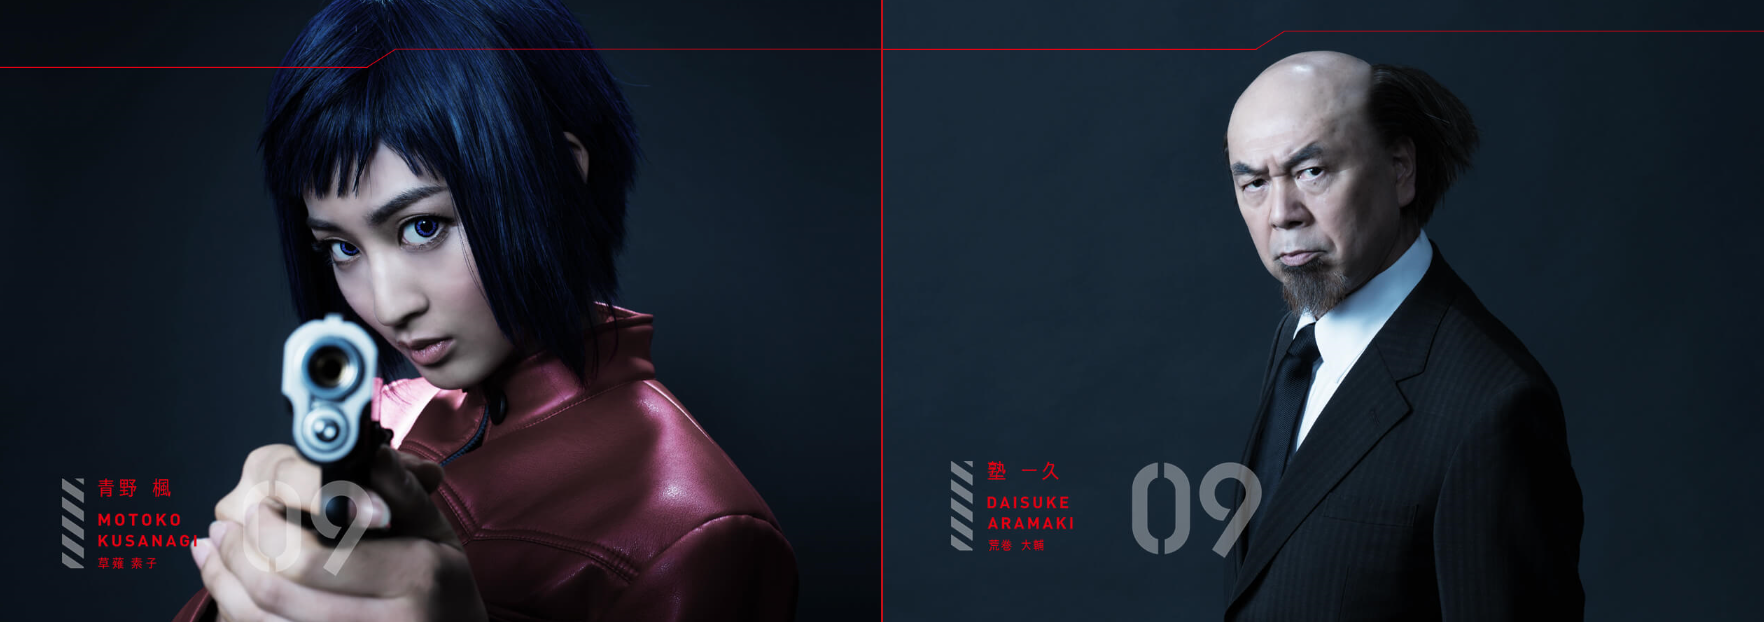 Ghost in the Shell in costume as producers reveal cast photos, reason for  no DVD plans | SoraNews24 -Japan News-